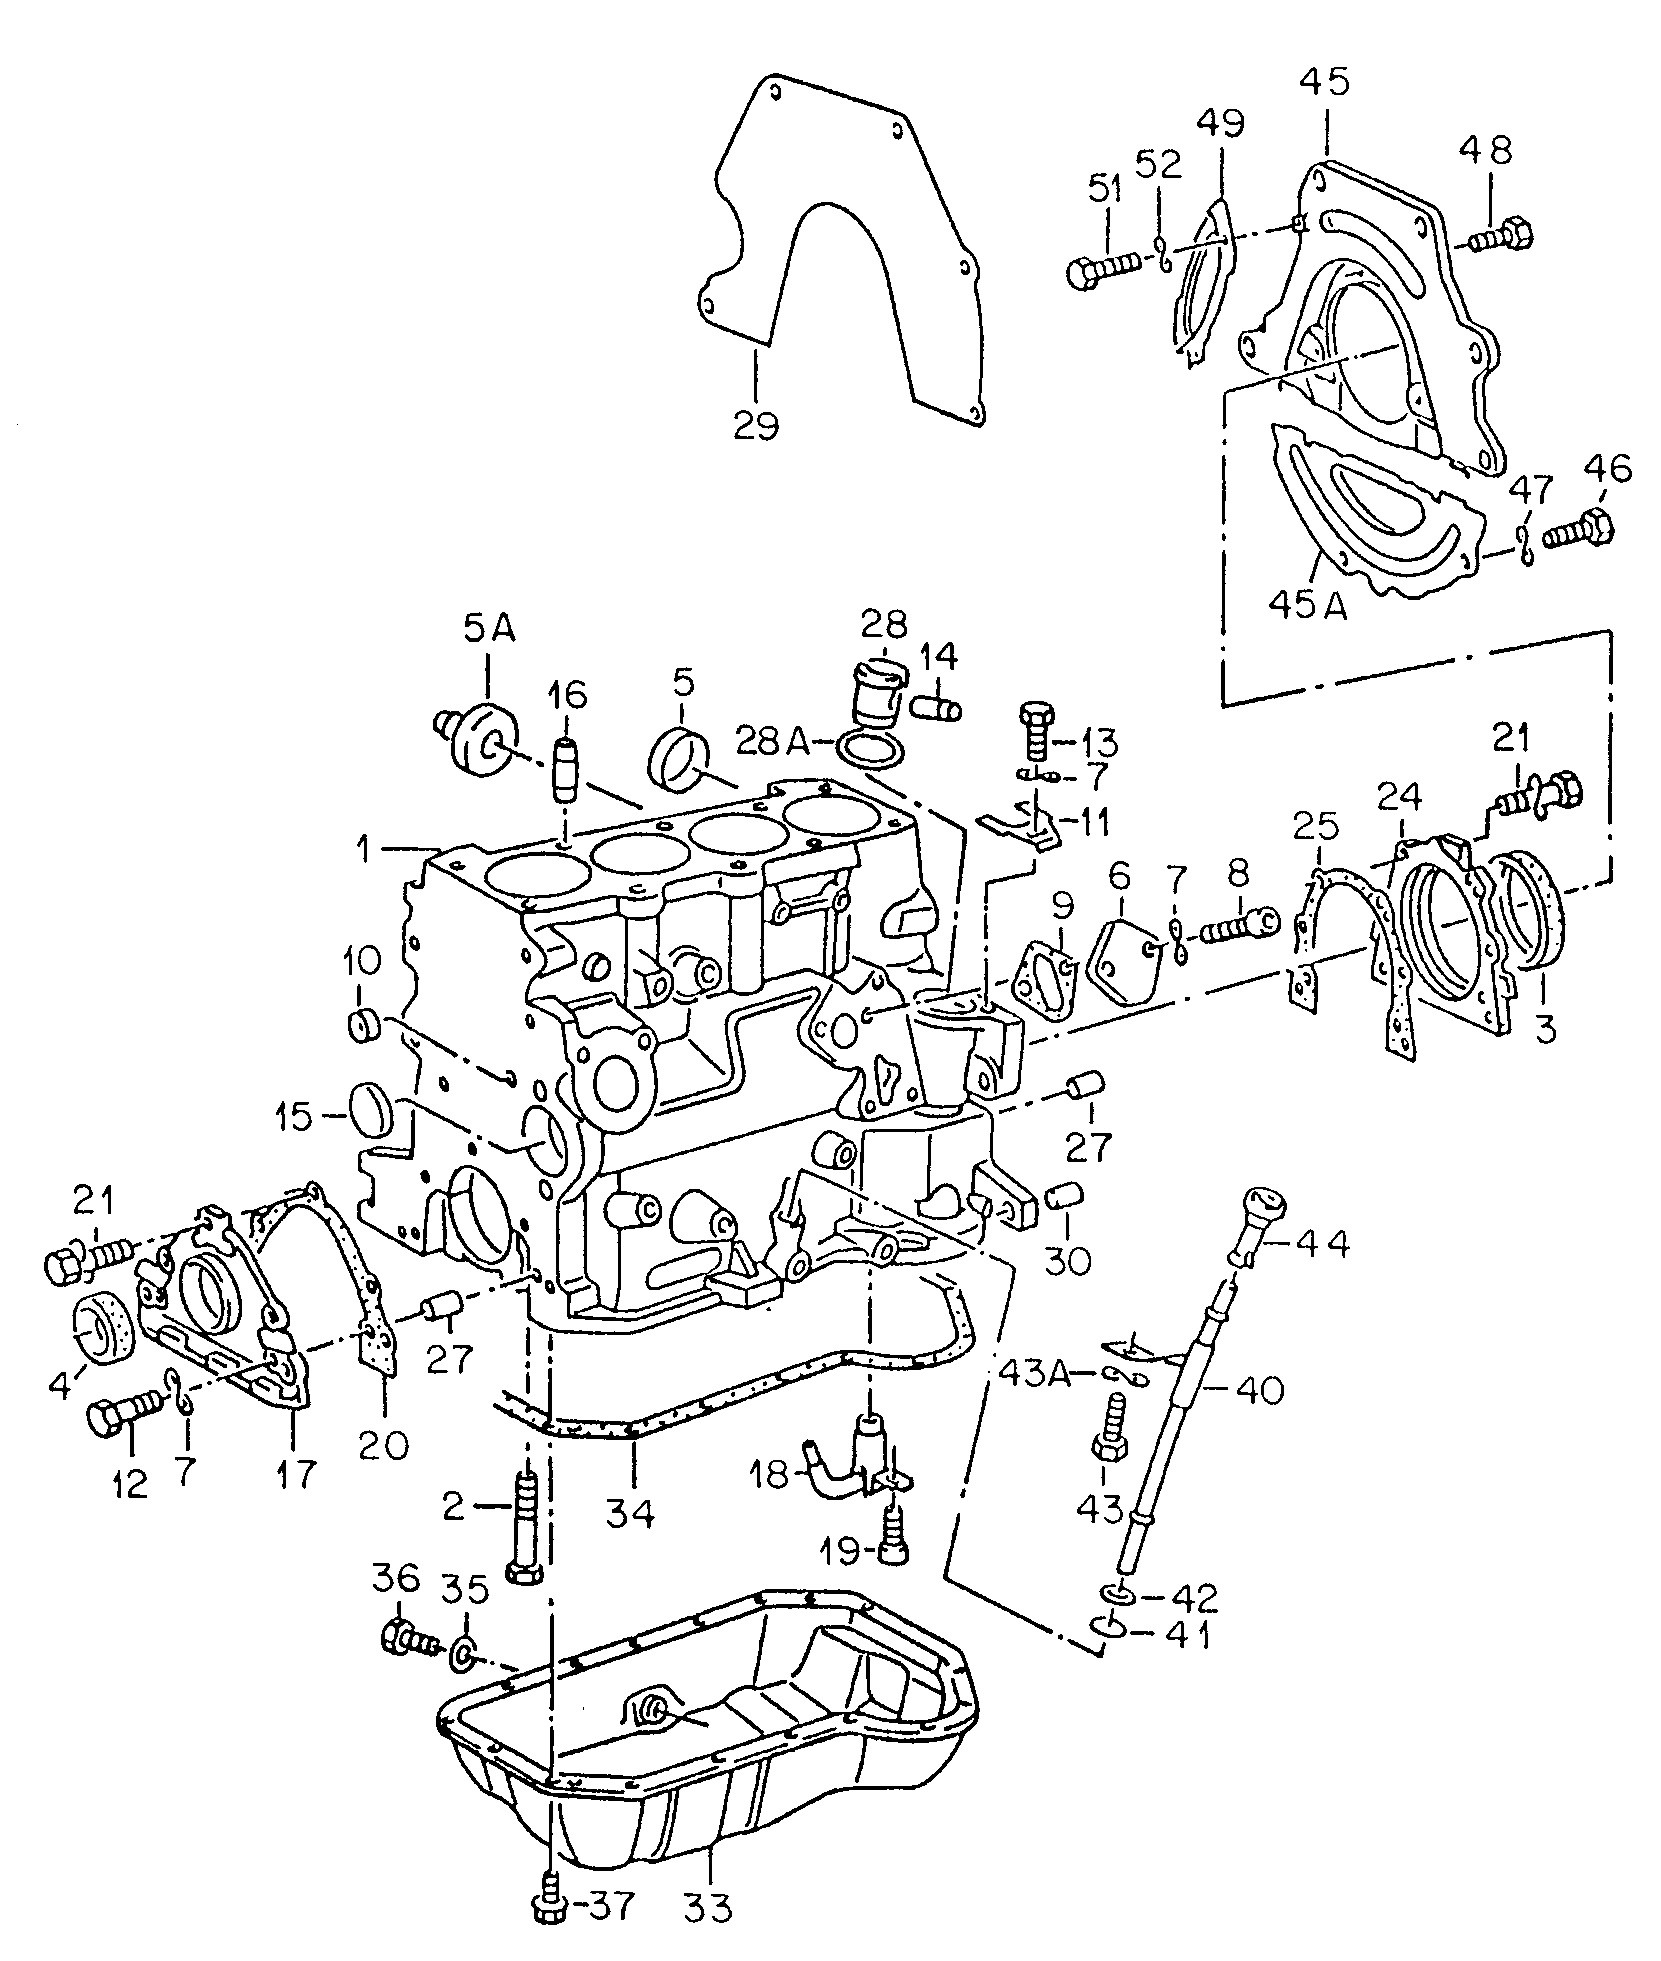 cylinder block with pistons; oil sump - Golf(GOM)  